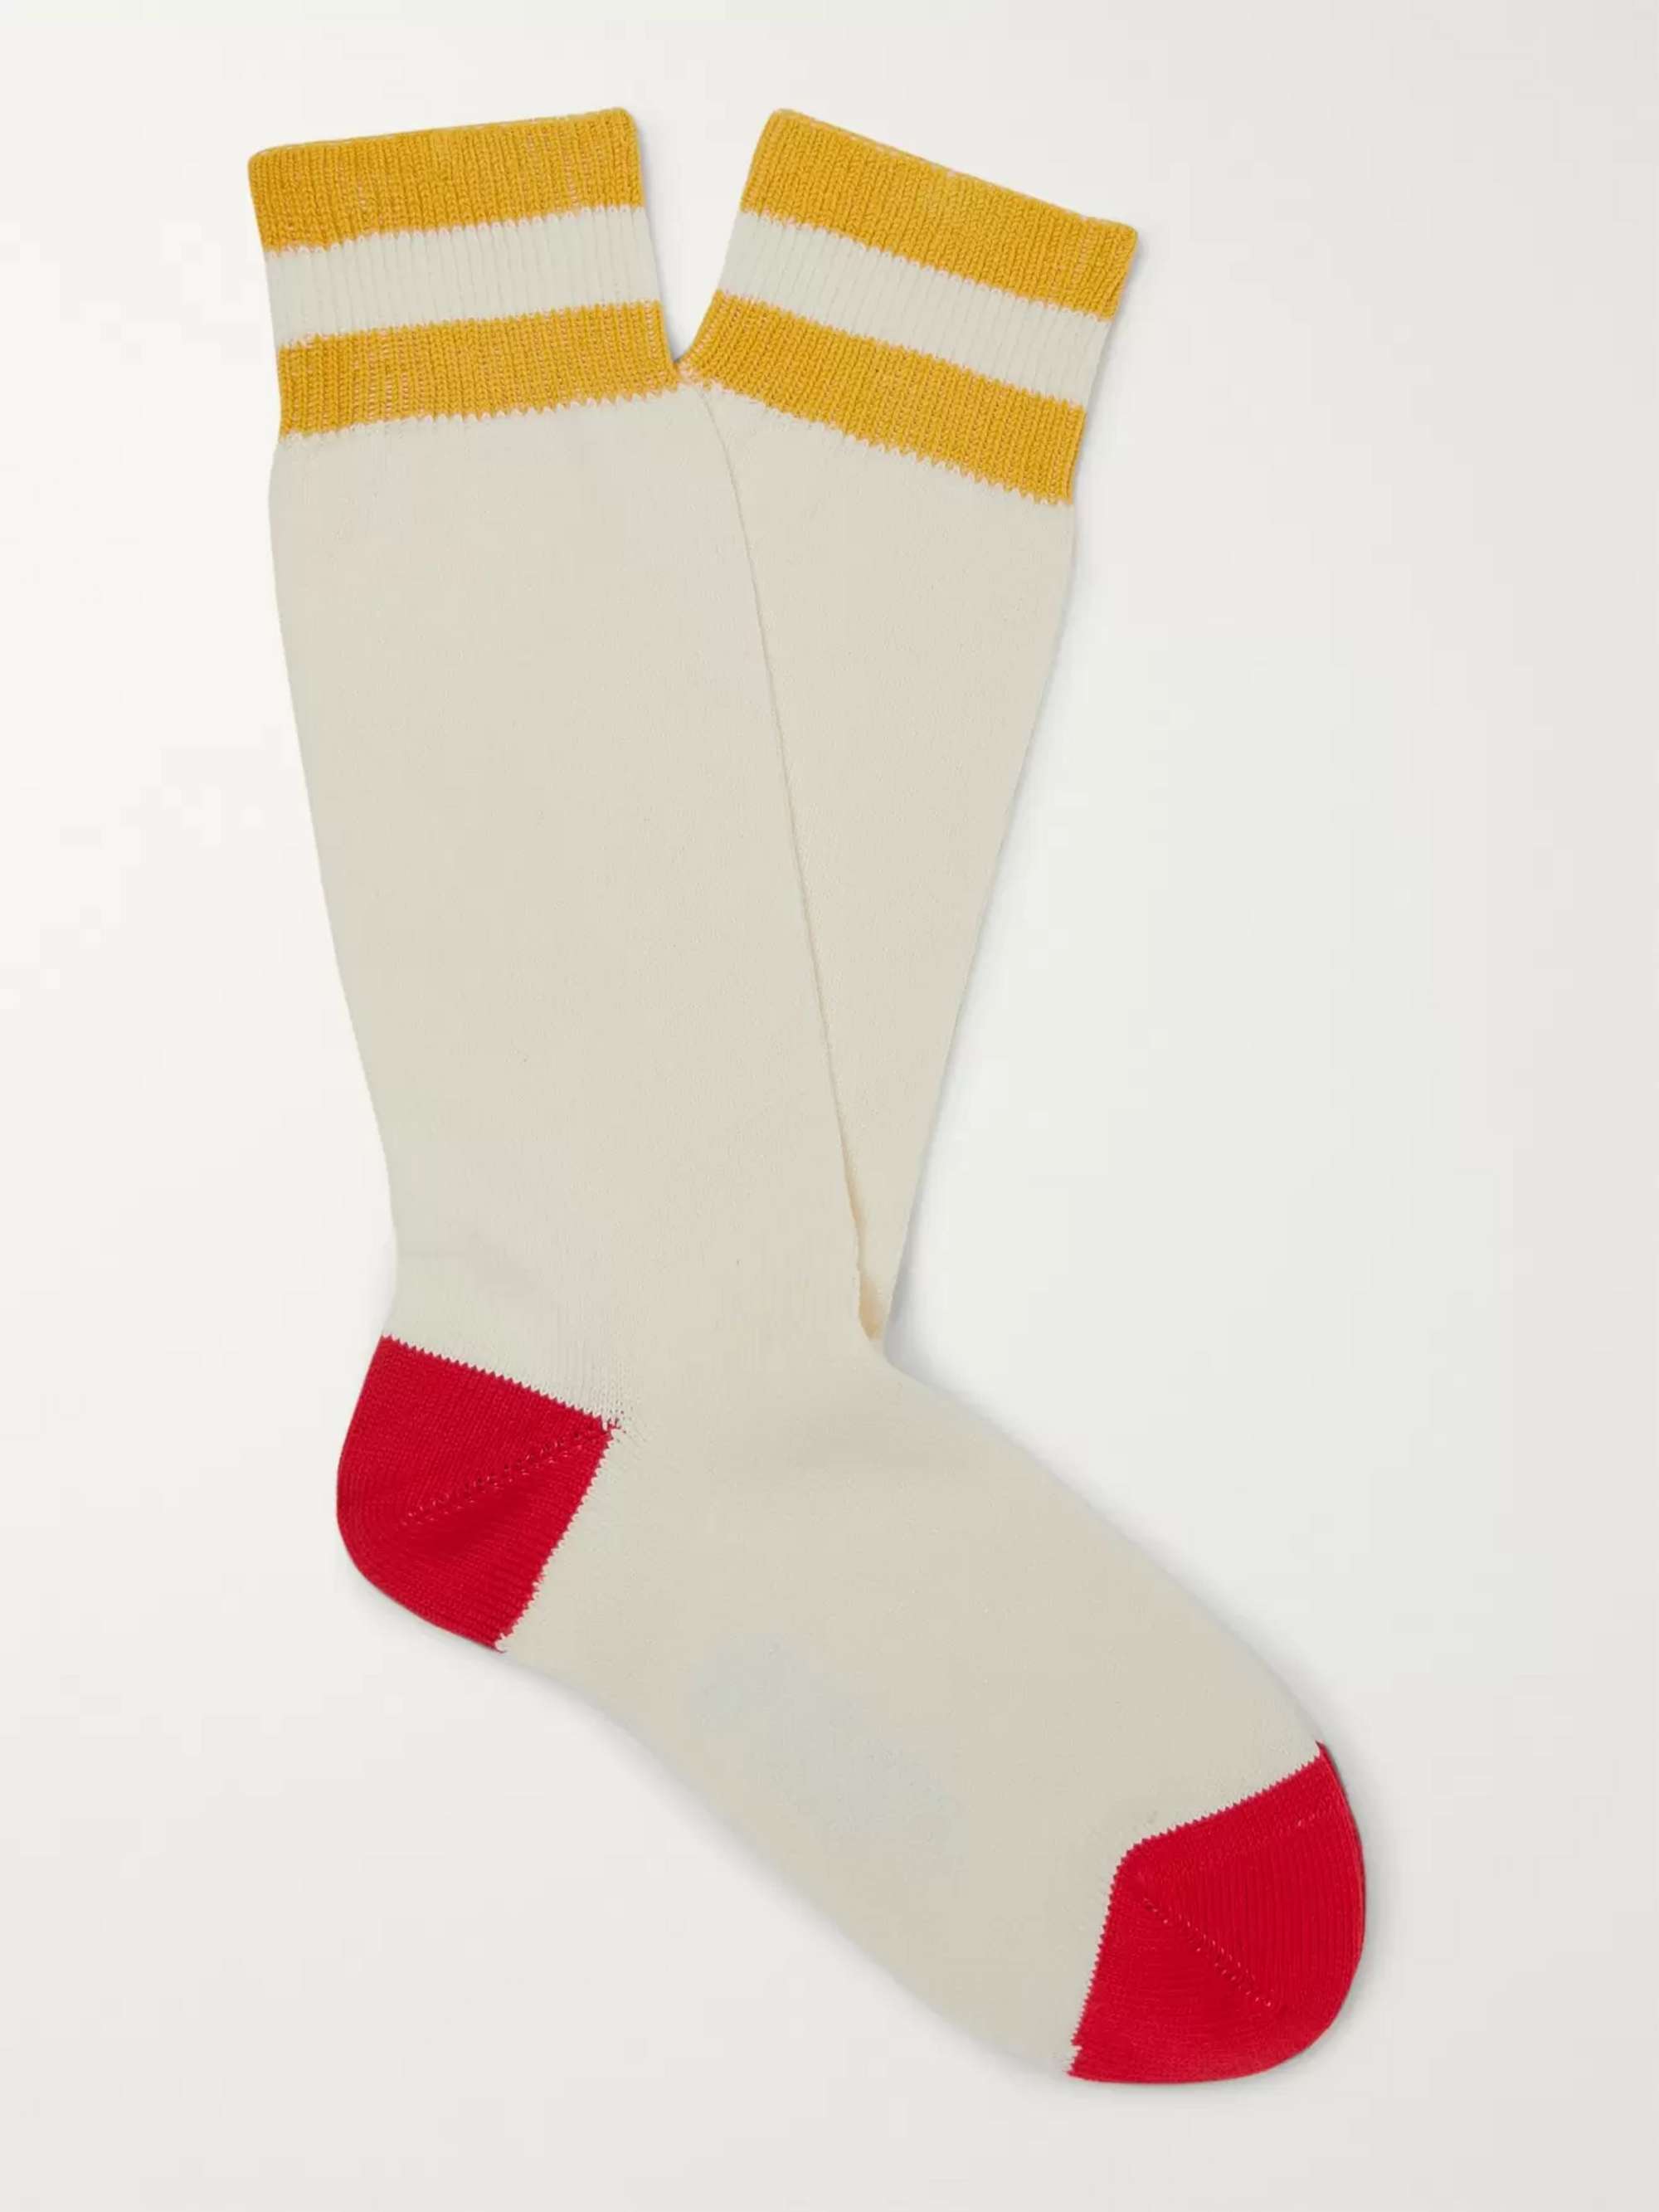 CONNOLLY + Goodwood Striped Cotton Socks